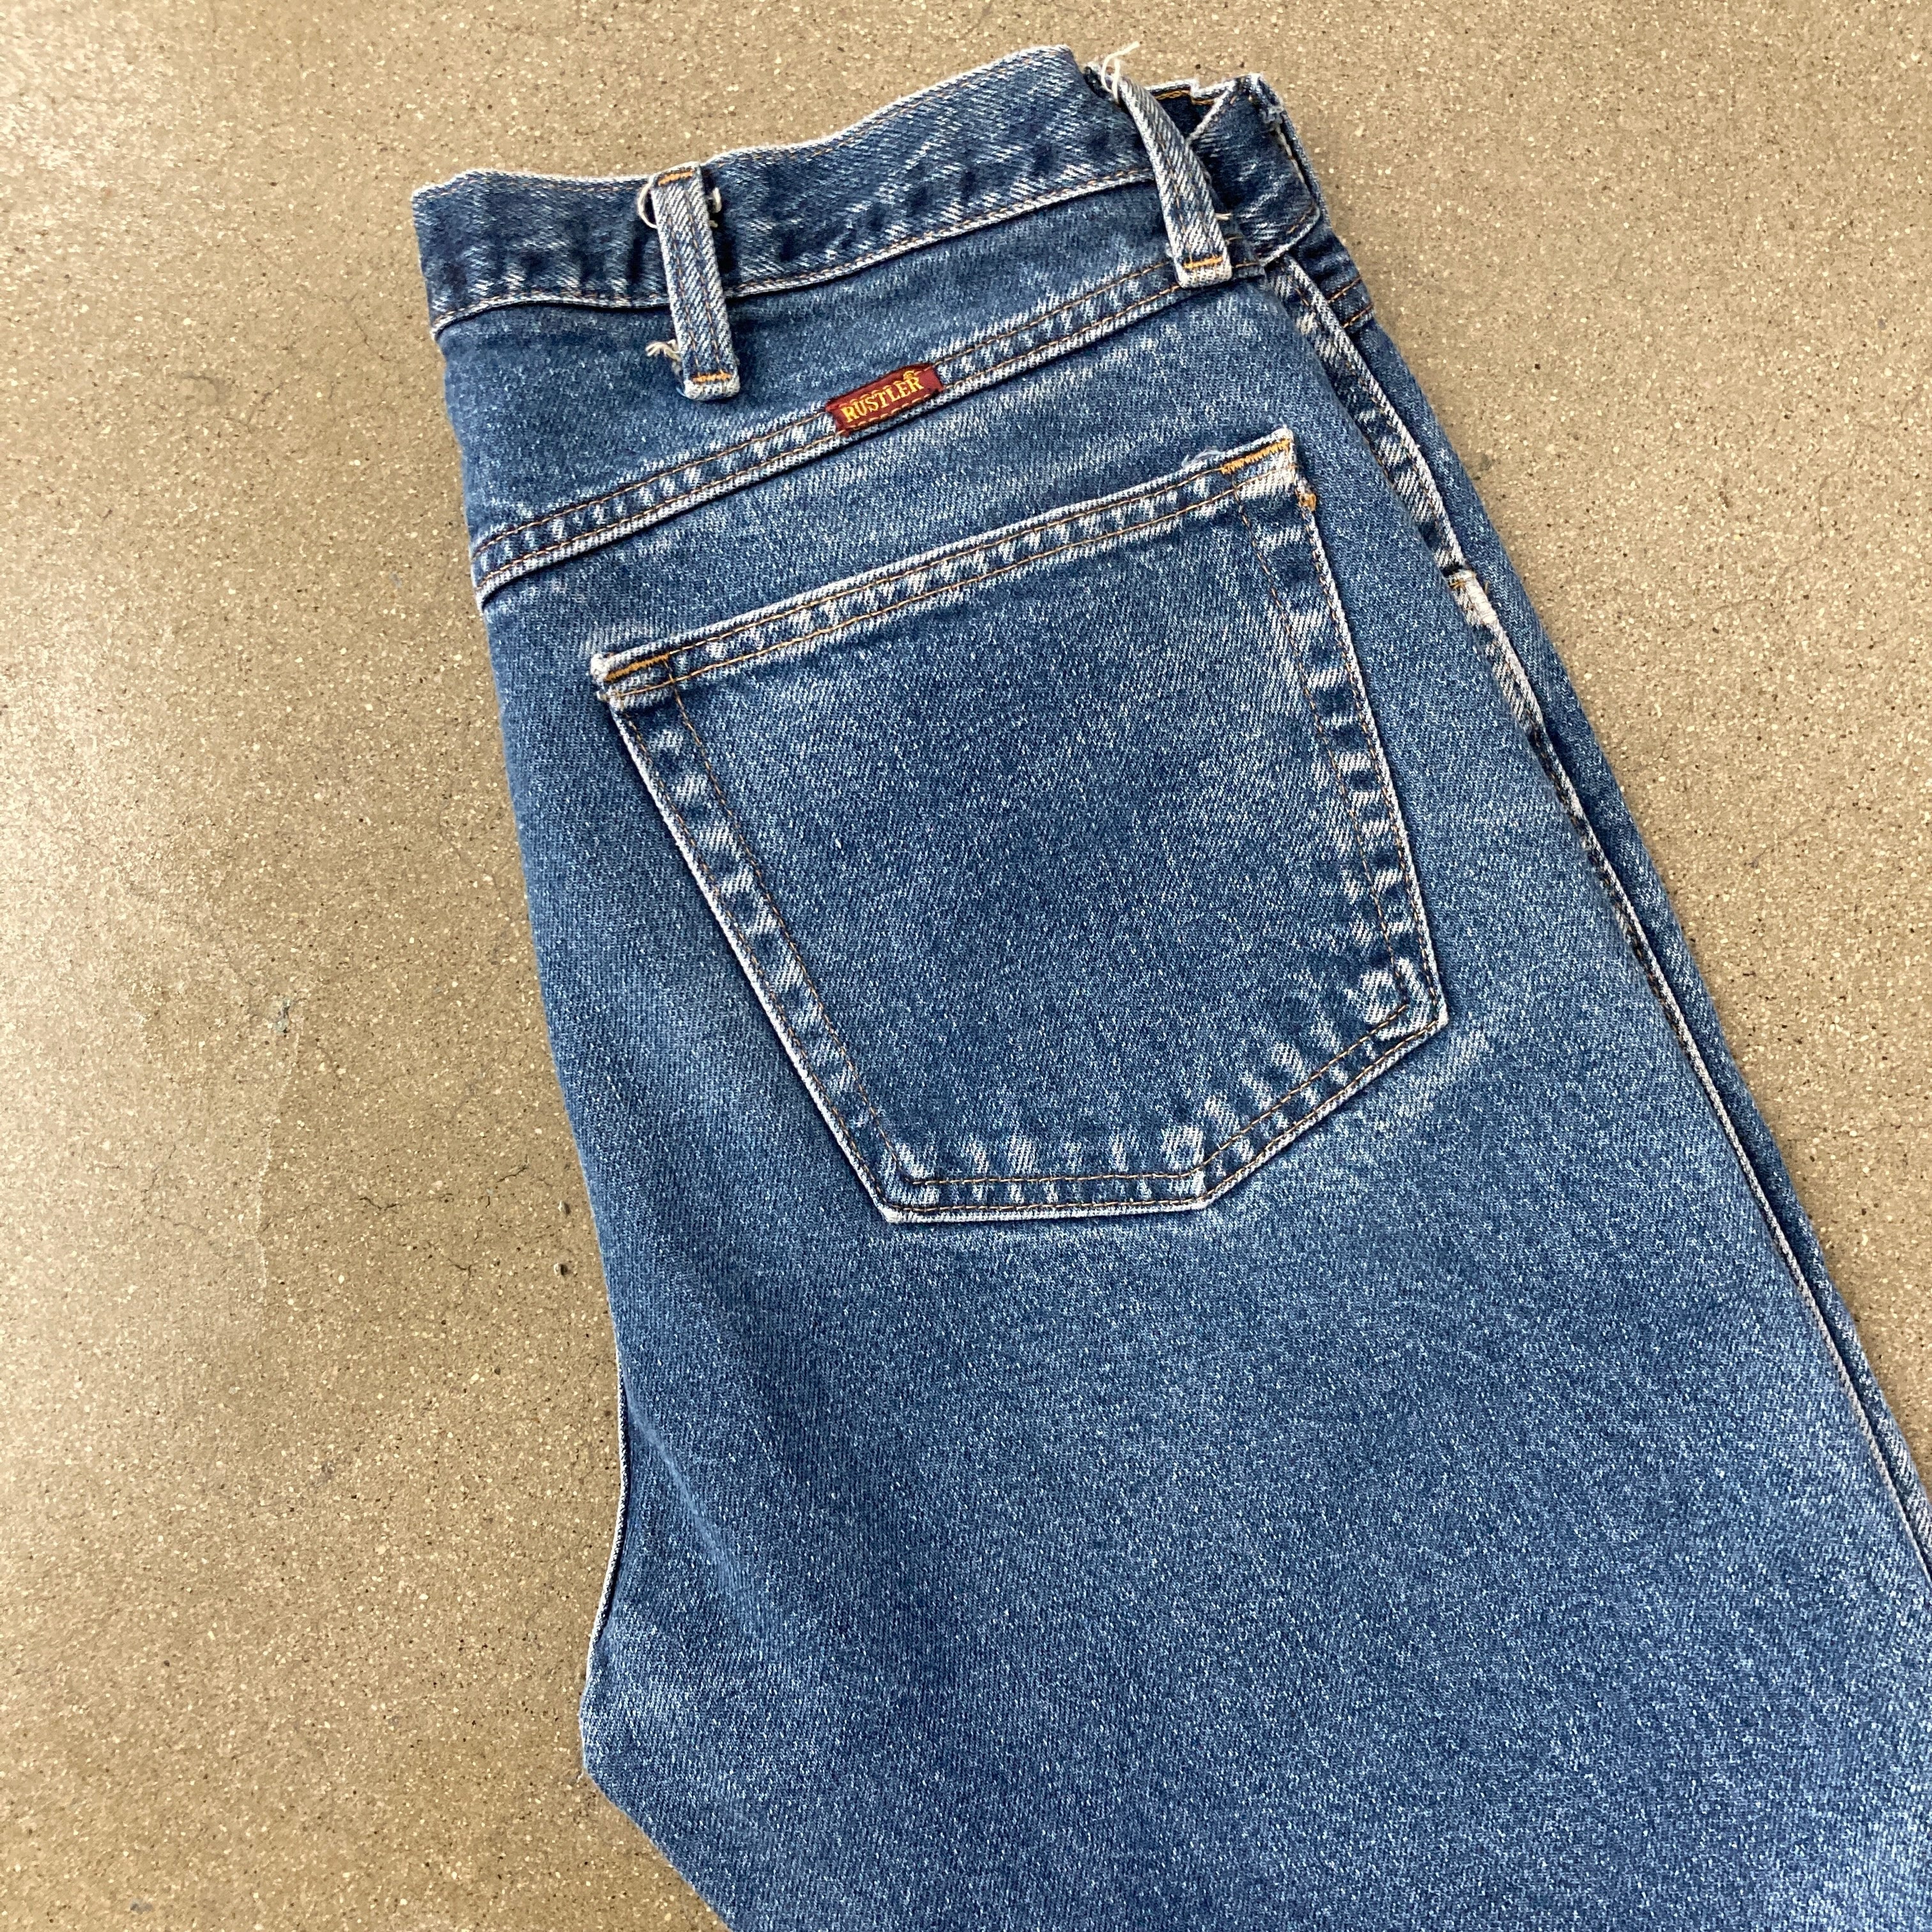 1990s 32x29 Rustler Medium Wash Made in Mexico Jeans